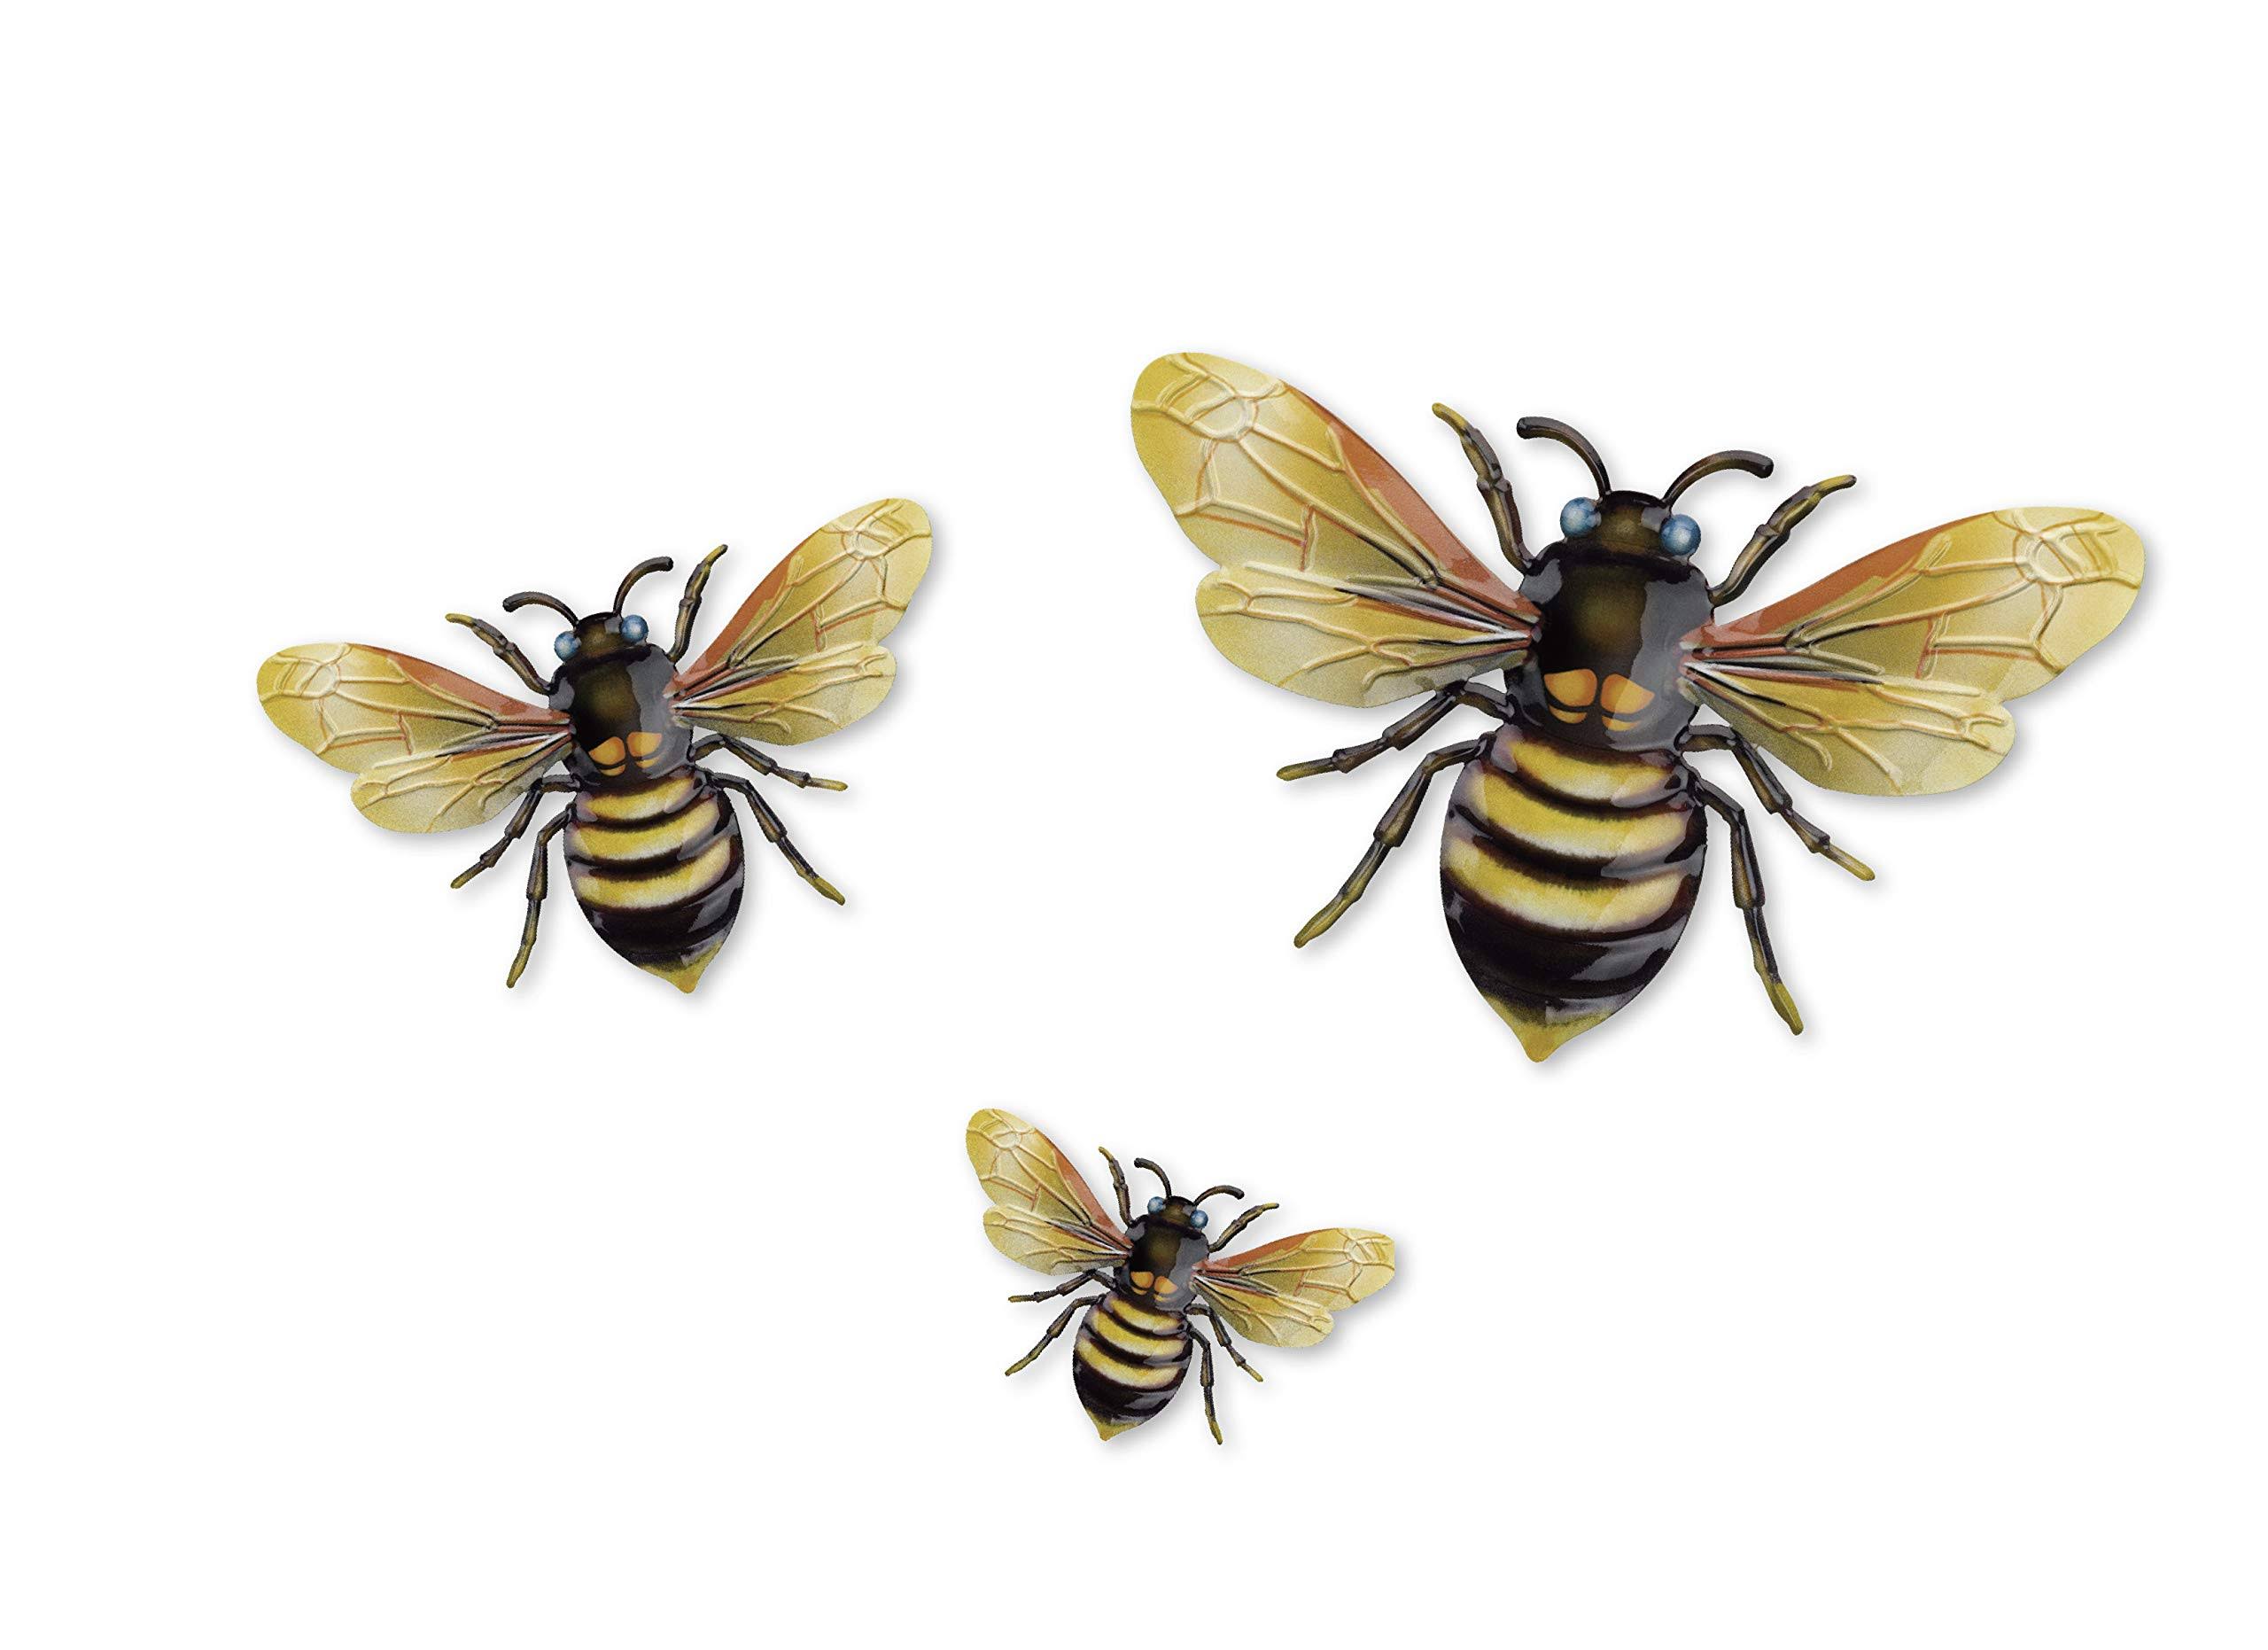 Regal Art & Gift Amber Luster Bee Wall Art - Set of Three One-Size